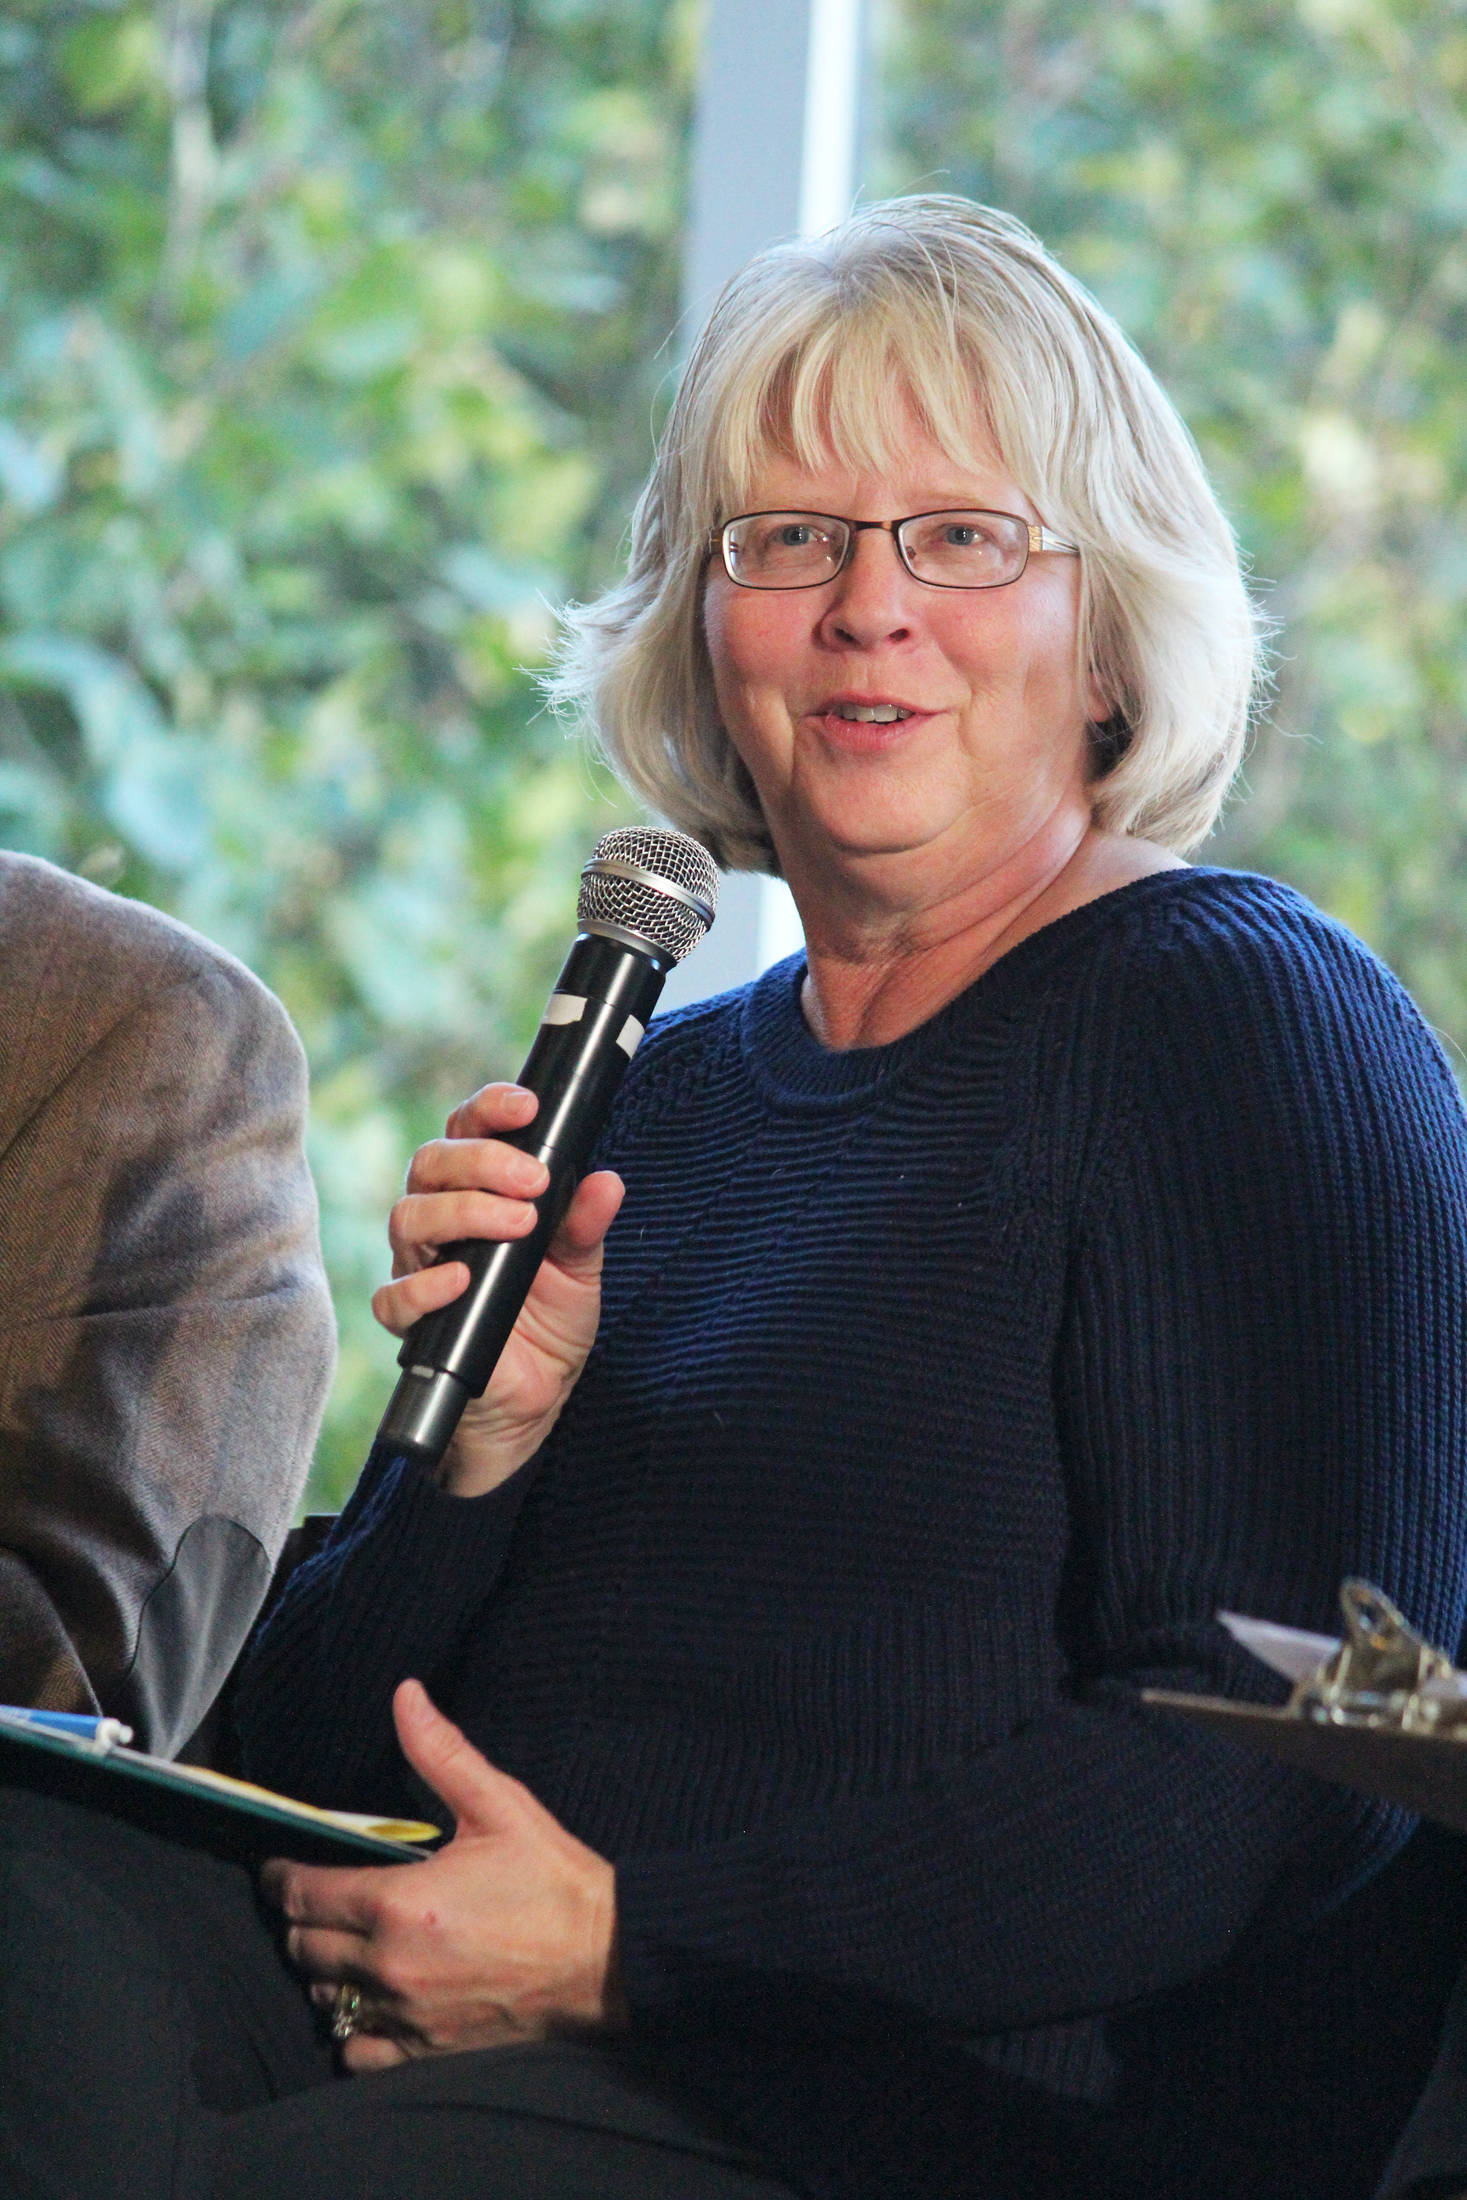 Shelly Erickson, a Homer City Council member running for re-election, speaks during a candidate forum Wednesday, Sept. 25, 2019 at the Homer Public Library in Homer, Alaska. (Photo by Megan Pacer/Homer News)